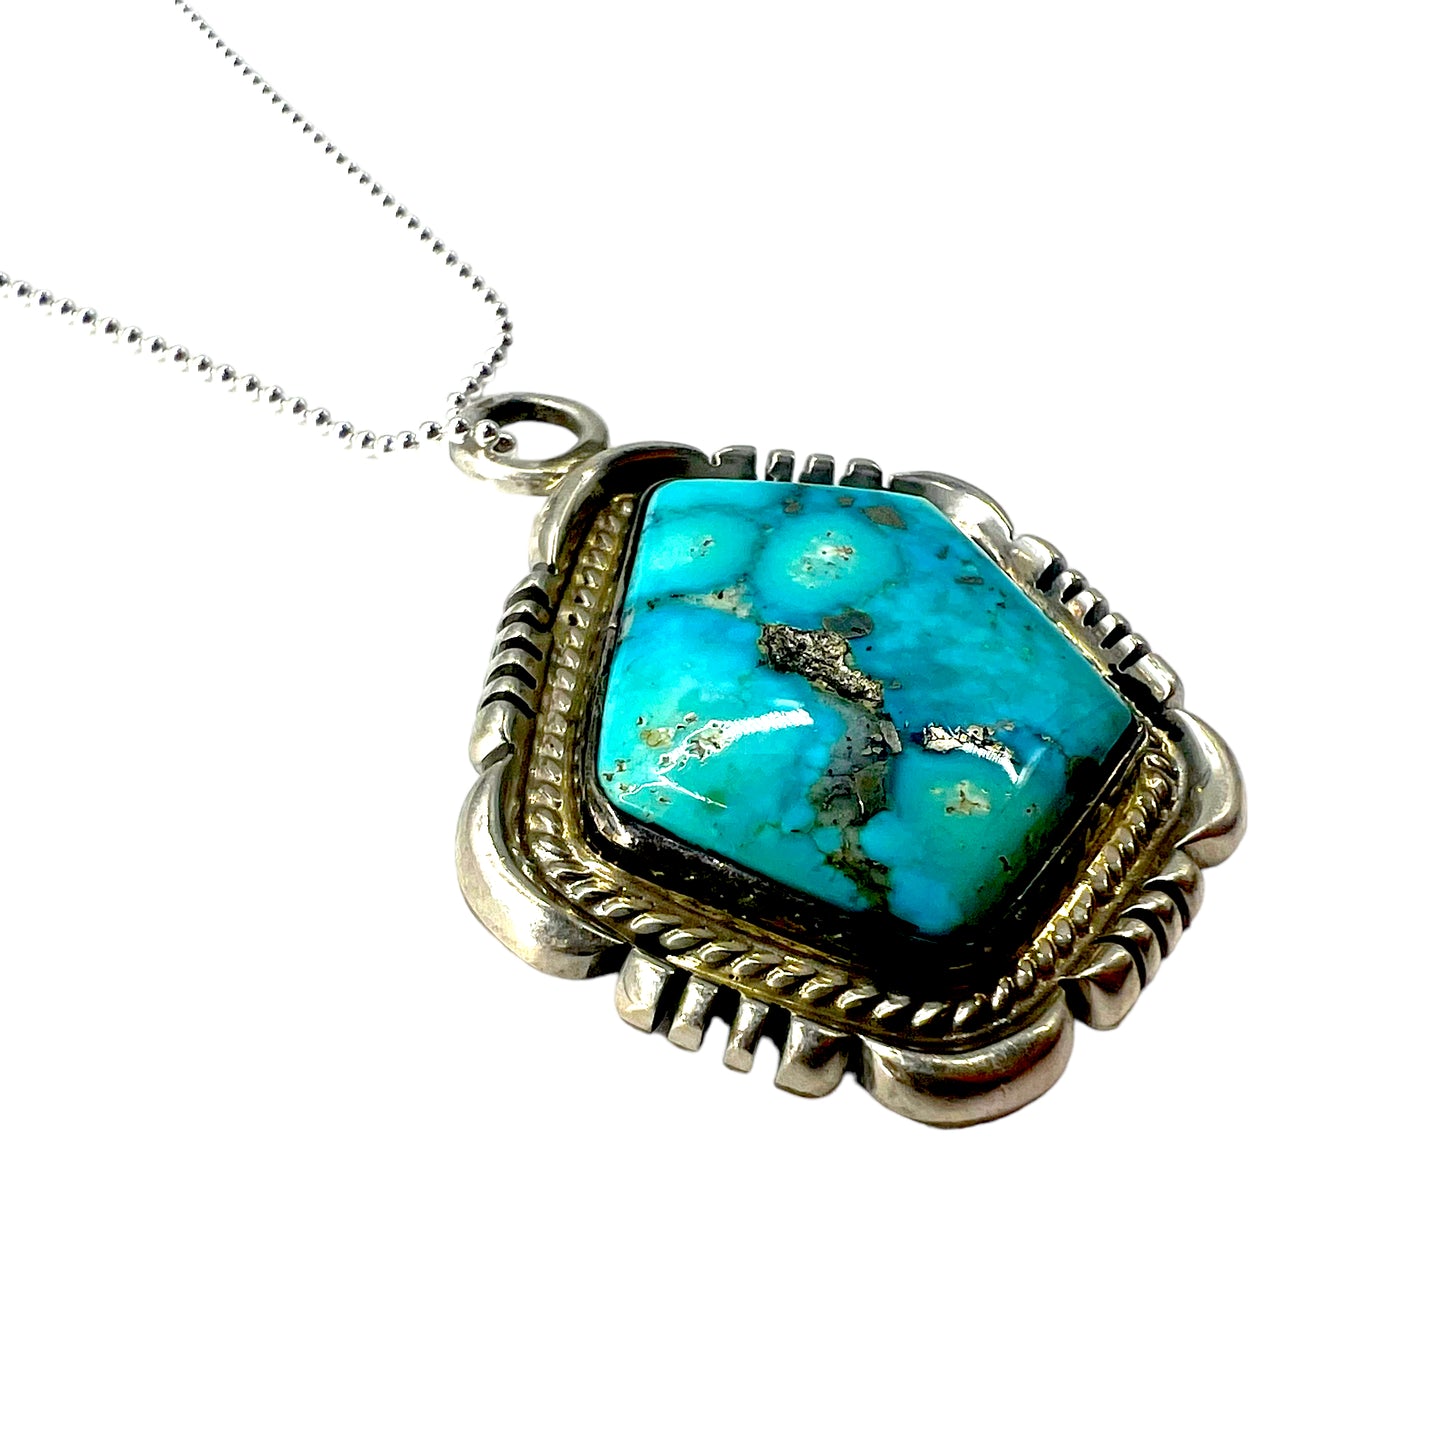 Navajo Vintage Indian Jewelry Turquoise Necklace ナバホ族 インディアンジュエリー ネックレス ターコイズ 刻印 P STERLING シルバー SILVER 925